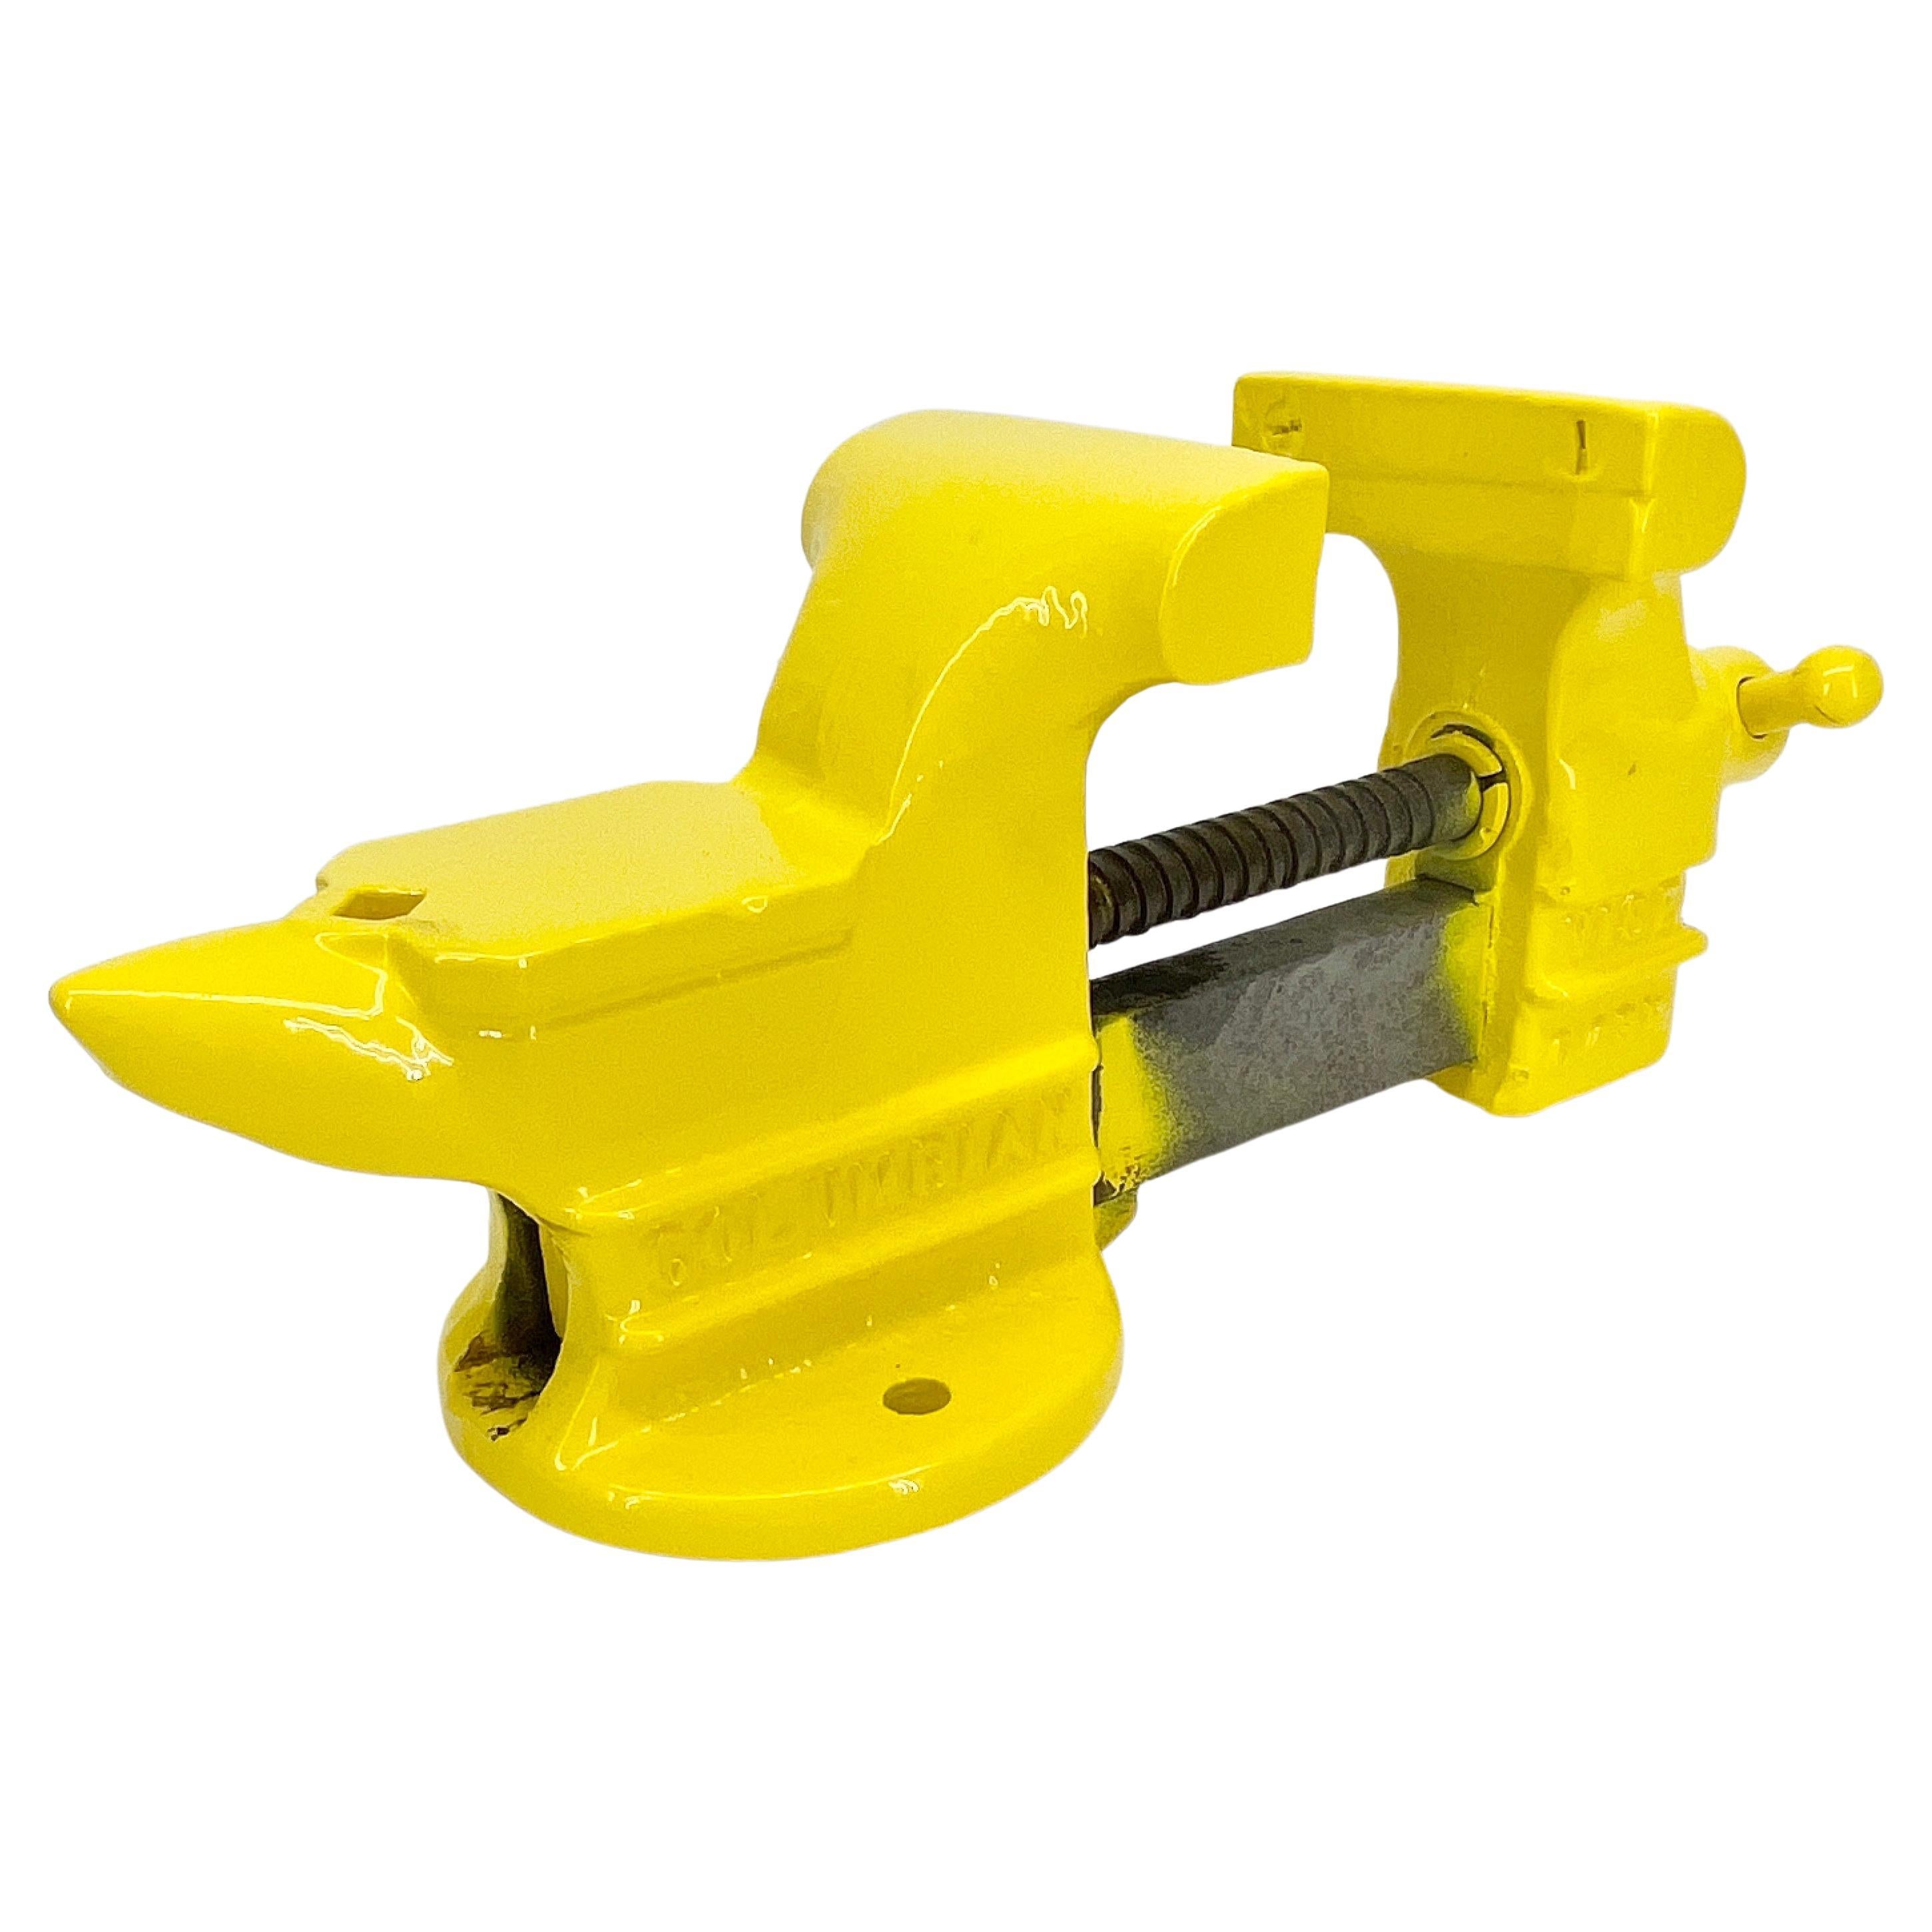 Vintage Tool Vice, Powder Coated Bright Yellow Desk Accessory In Good Condition For Sale In Haddonfield, NJ